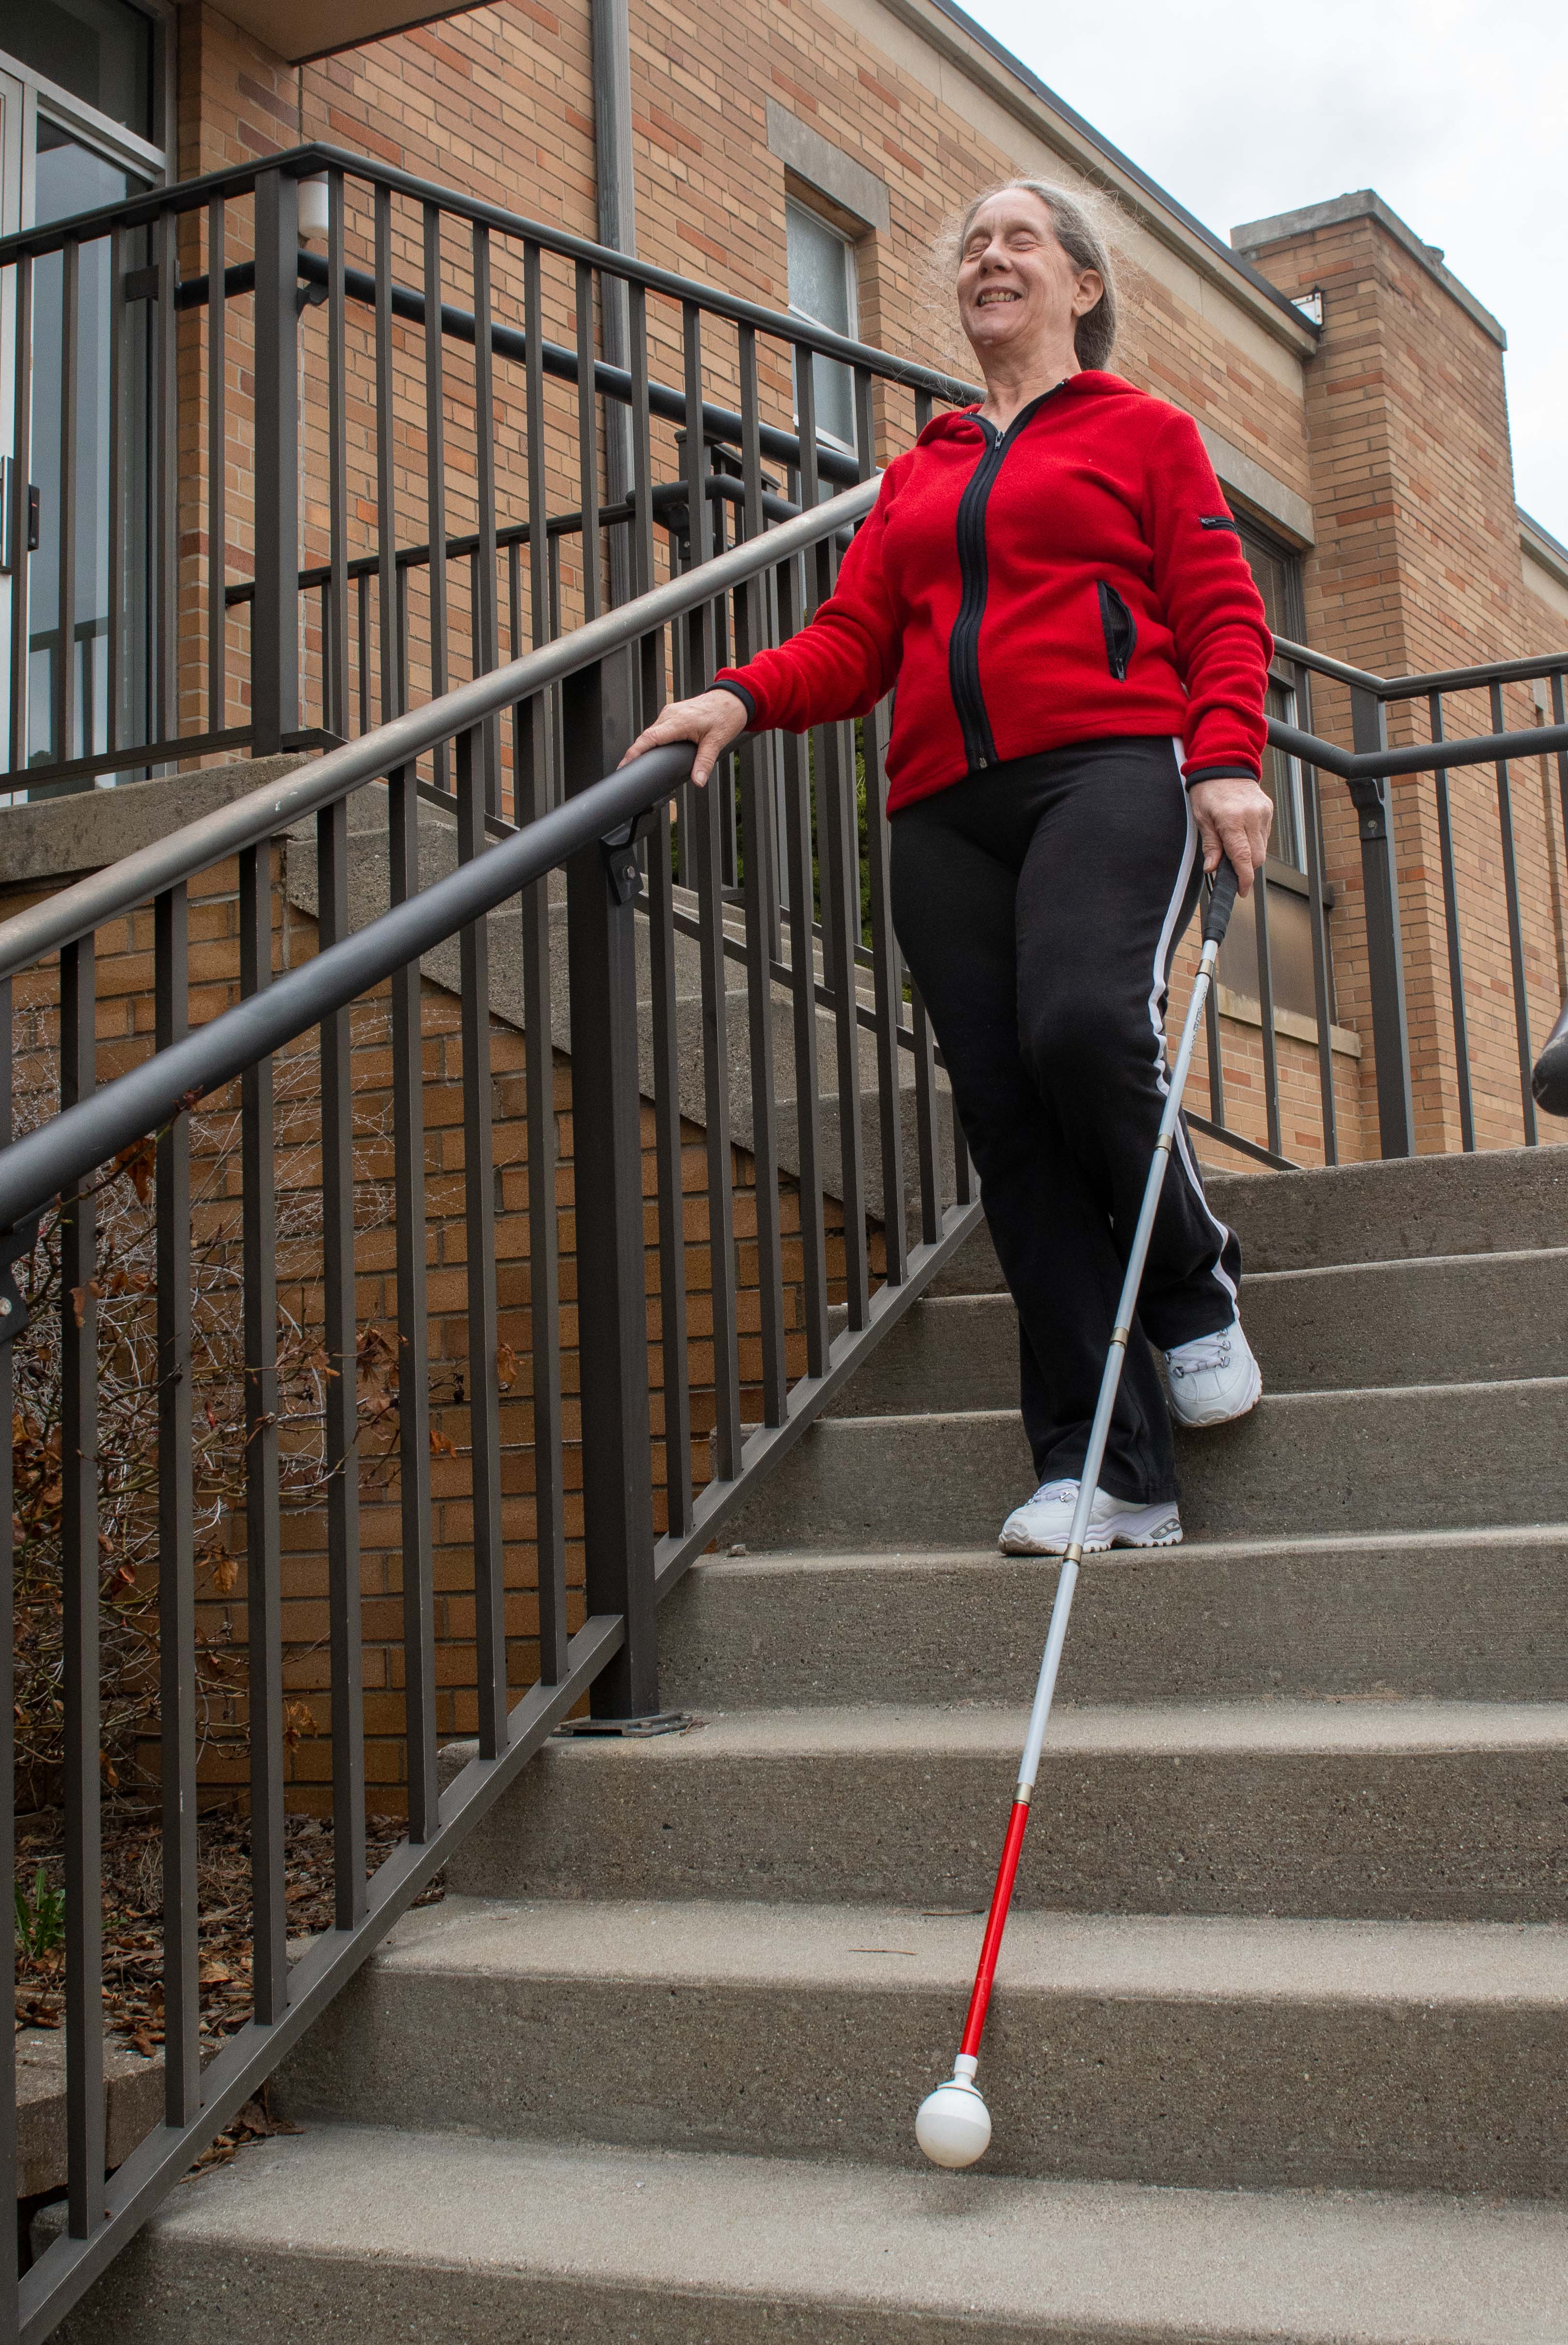 Orientation & Mobility Client at Leader Dogs for the Blind